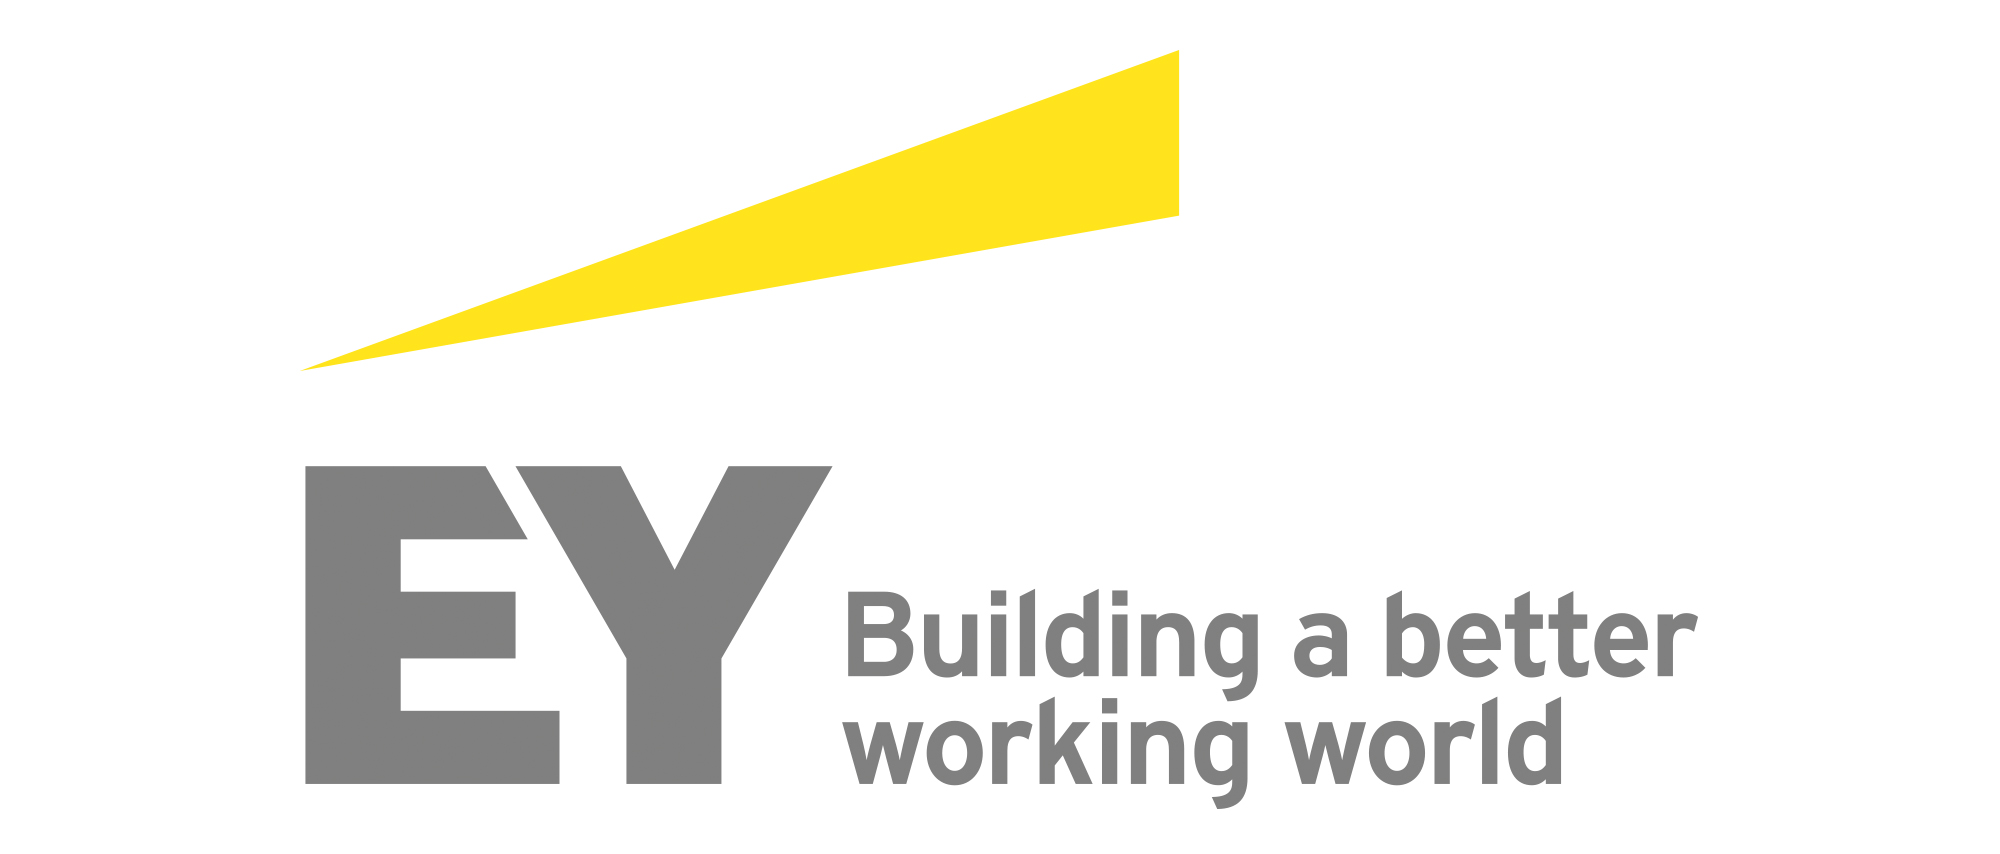 EY Contract Awarded